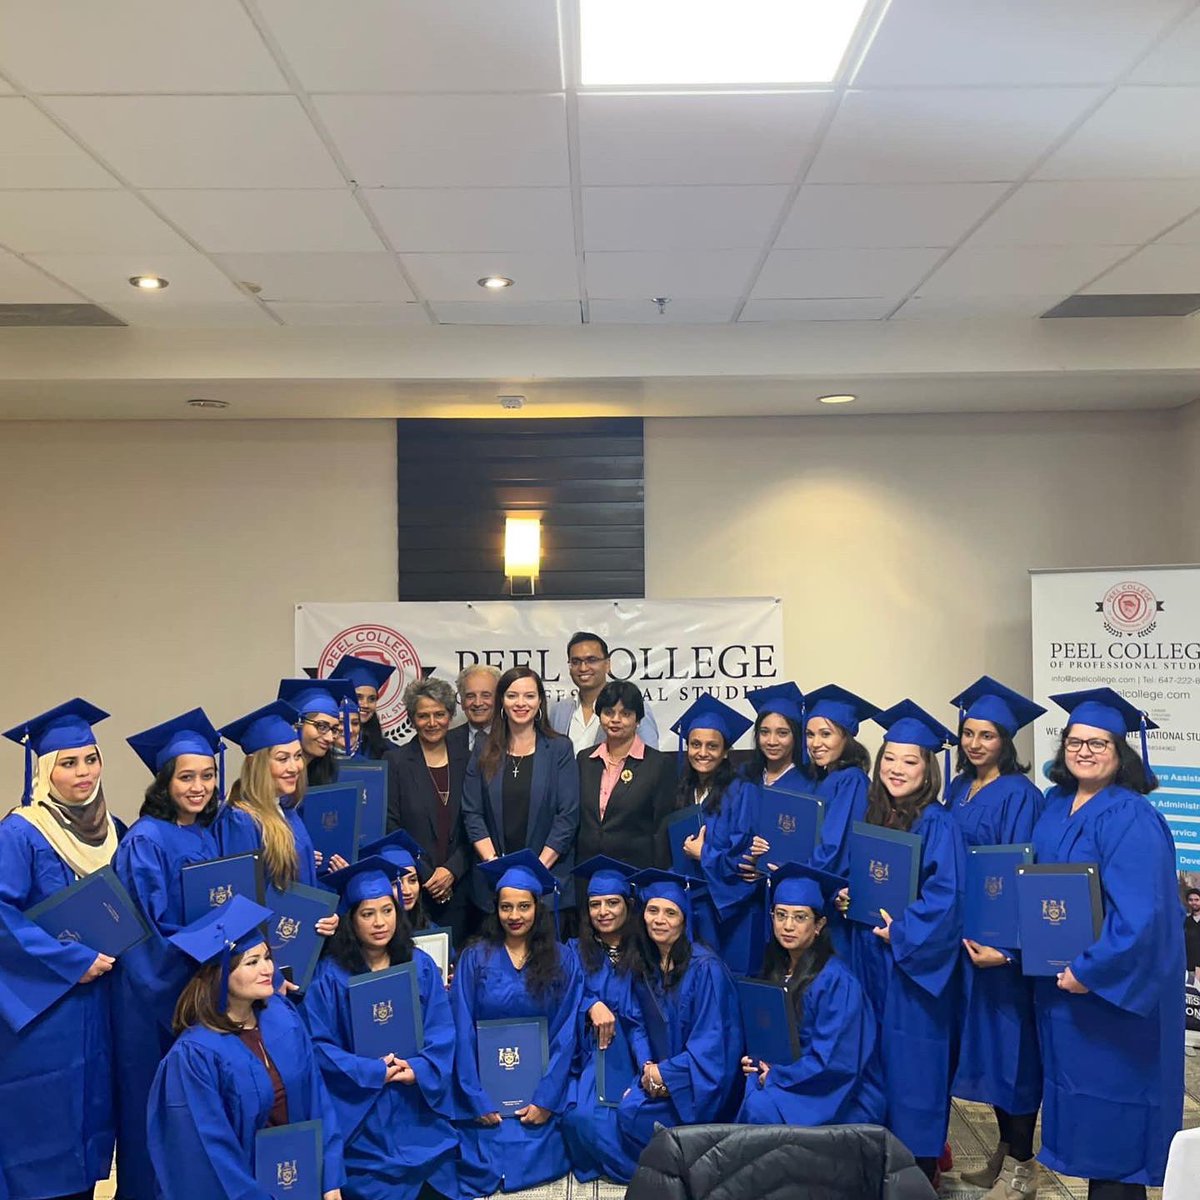 Congratulations to the Peel College of Professional Studies' newest 2022 graduates! 🎓🎓🎓 As a strong advocate for academics and furthering one’s education as a key to successs, I wish each and every graduate 🧑‍🎓 a fulfilling career and fruitful entry into the workplace.